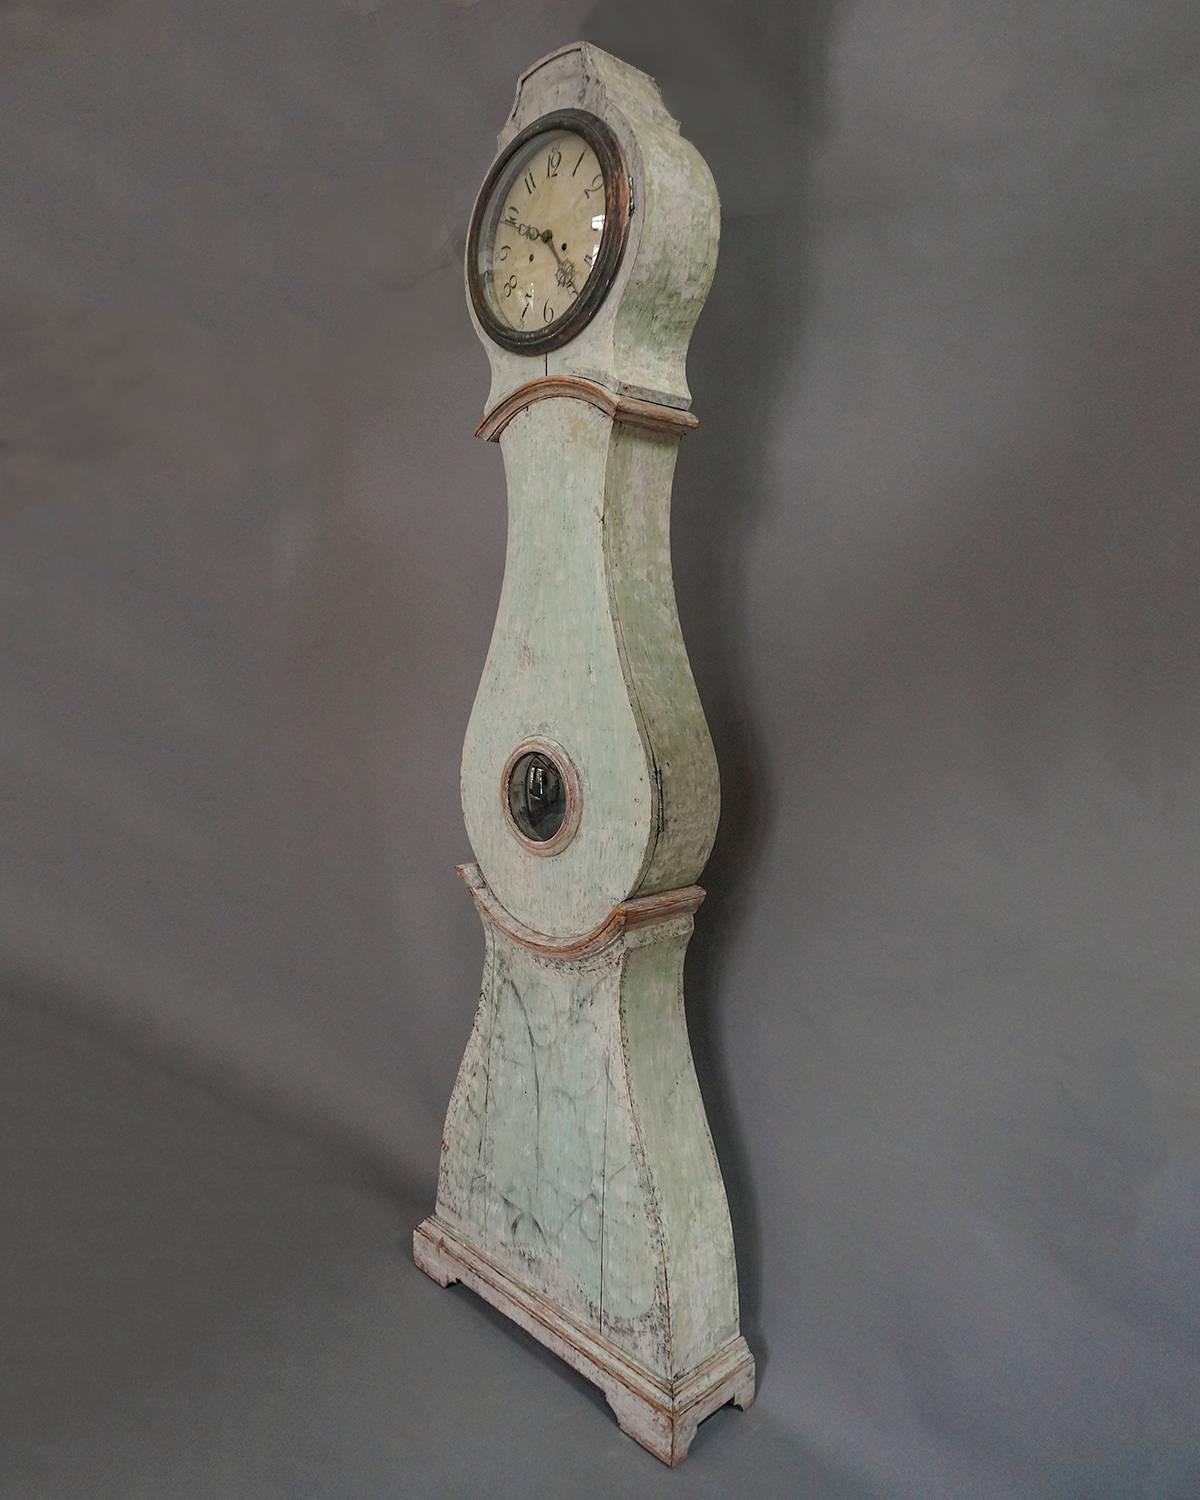 Swedish Mora clock, circa 1800, dry scraped to its original pale green painted surface and retaining traces of earlier decorative black paint. Hand-painted dial with unusual steel hour and minute hands. Newly cleaned and adjusted.